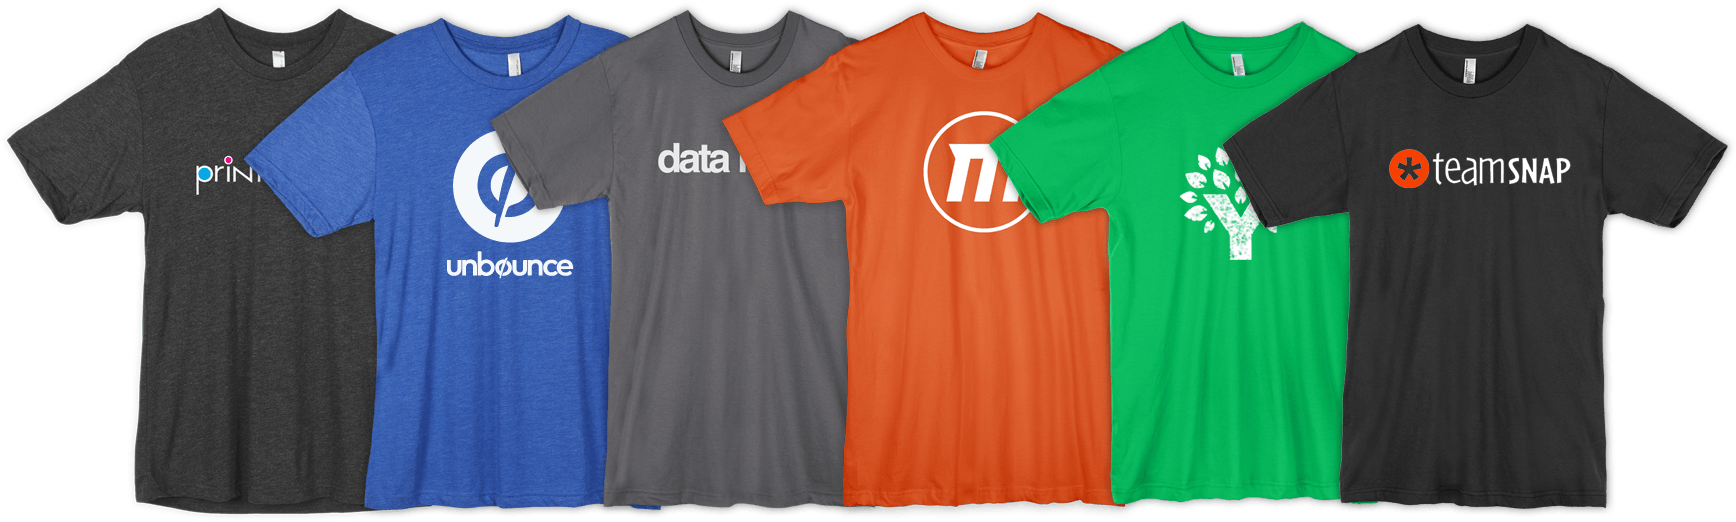 T-shirt lineup with various company brands like New Relic, Printfection, and TeamSnap